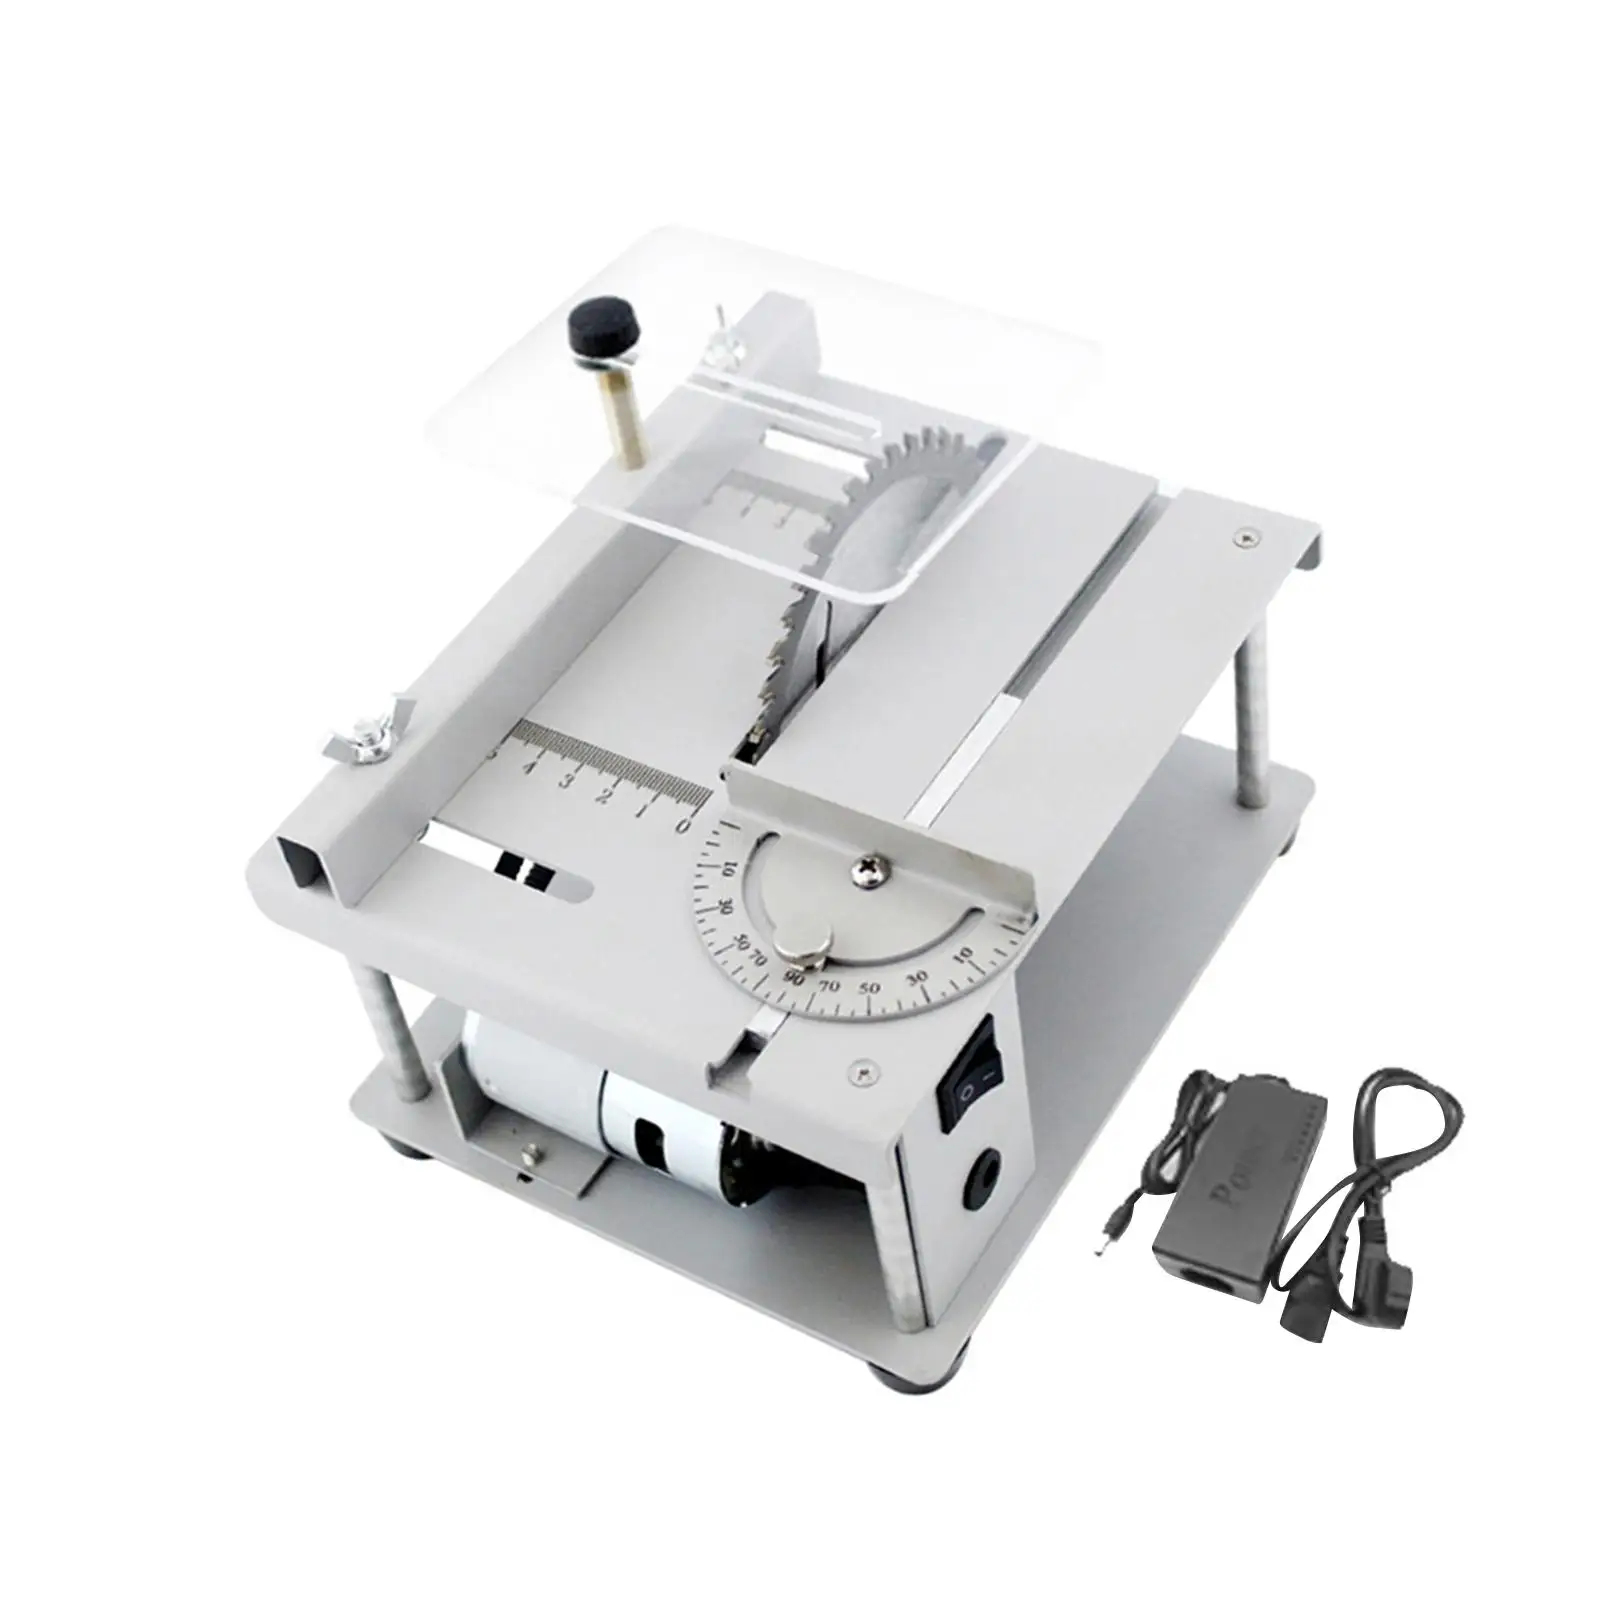 

Woodworking Electric Saw Model Cutter Machine DIY Model Crafts Cutting Tool Mini Table Saw for Miniatures Wood Crafts Metal